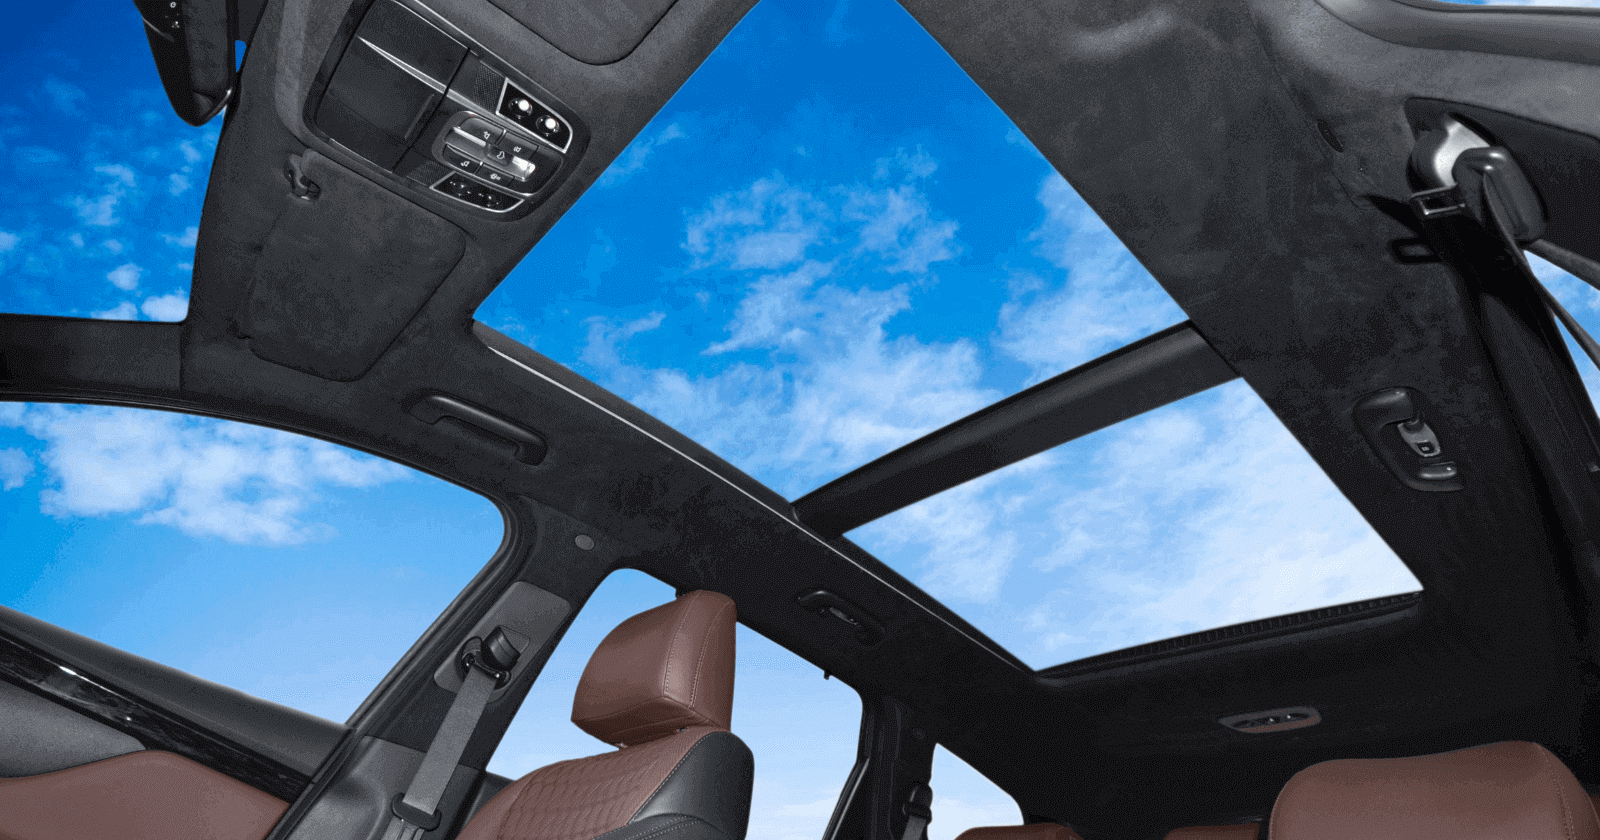 5 best cars with sunroofs under 10 lakh Price, specification, and features